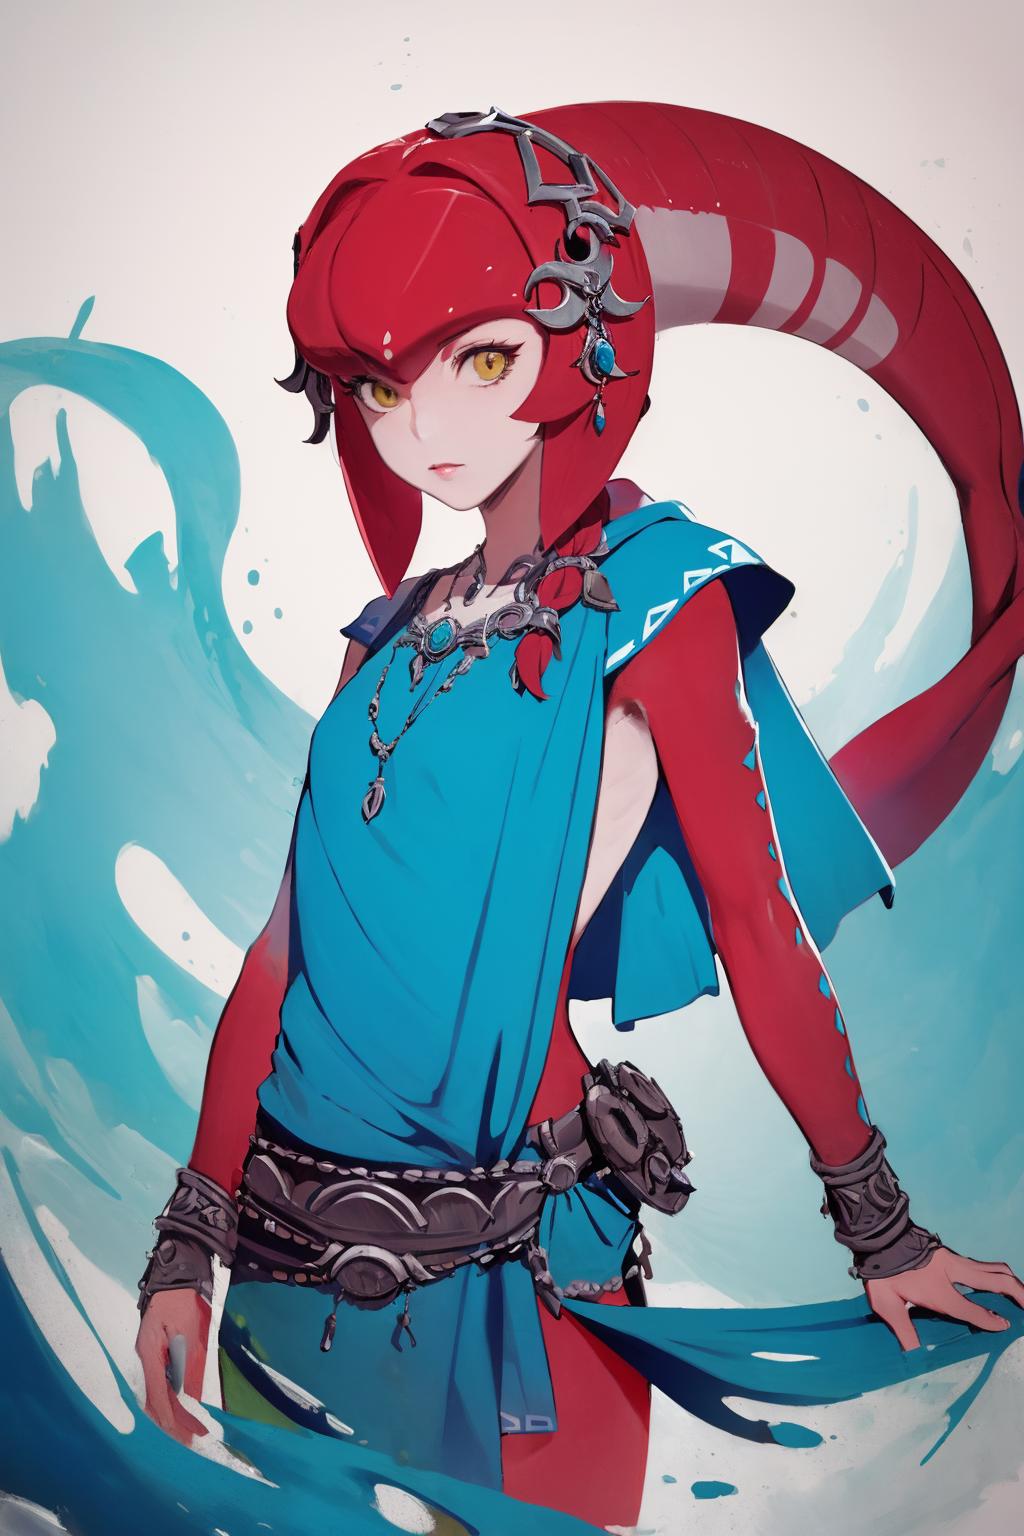 Mipha | The Legend of Zelda image by silvermoong